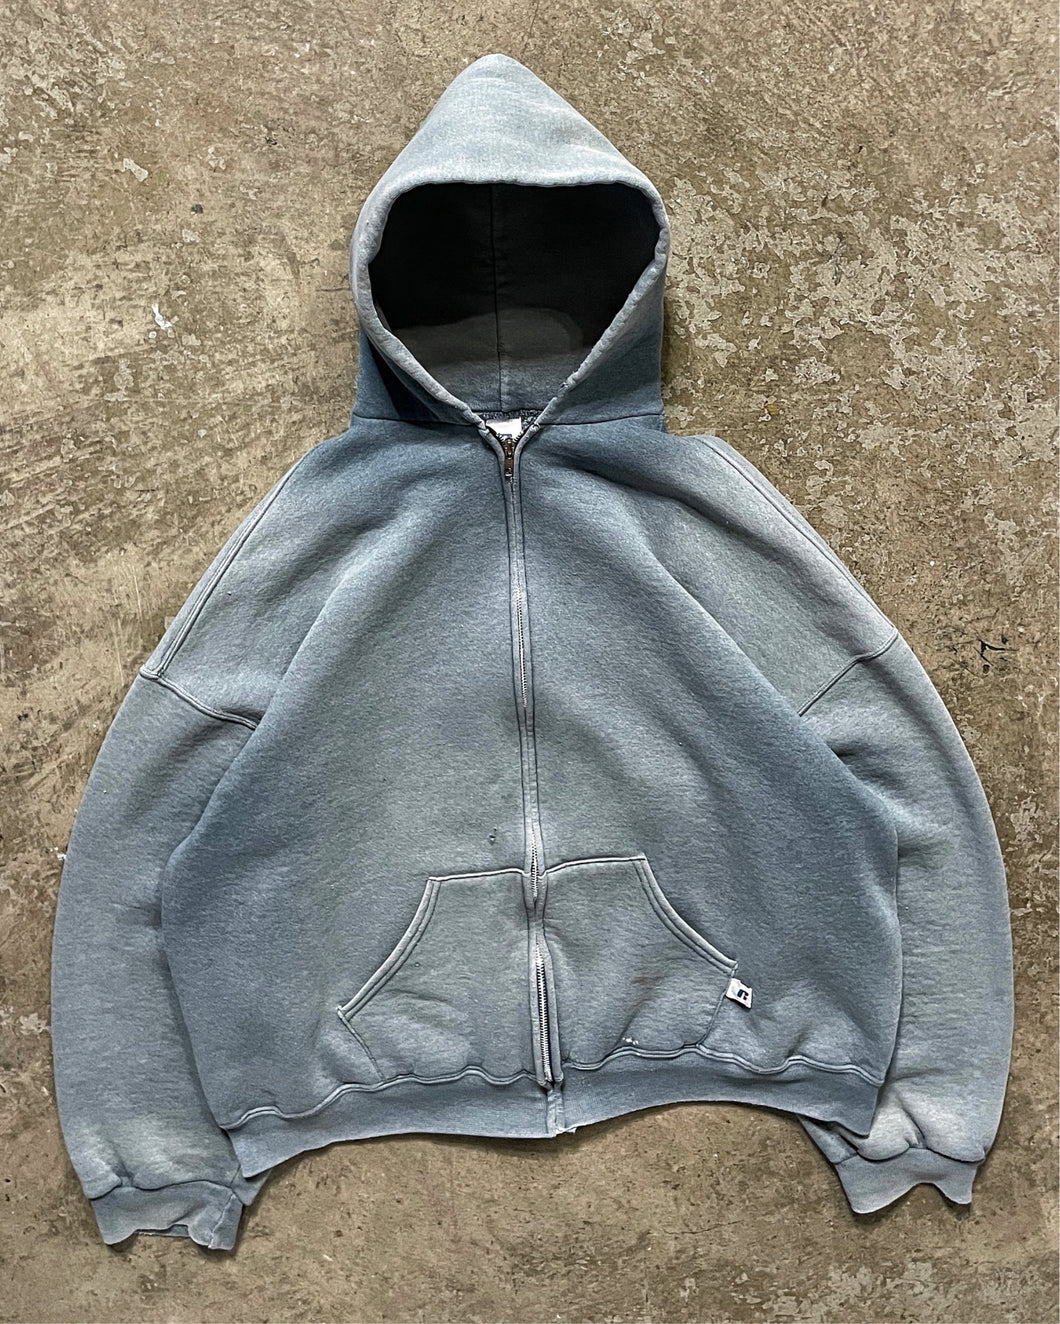 SUN FADED GREY RUSSELL ZIP UP HOODIE - 1990S